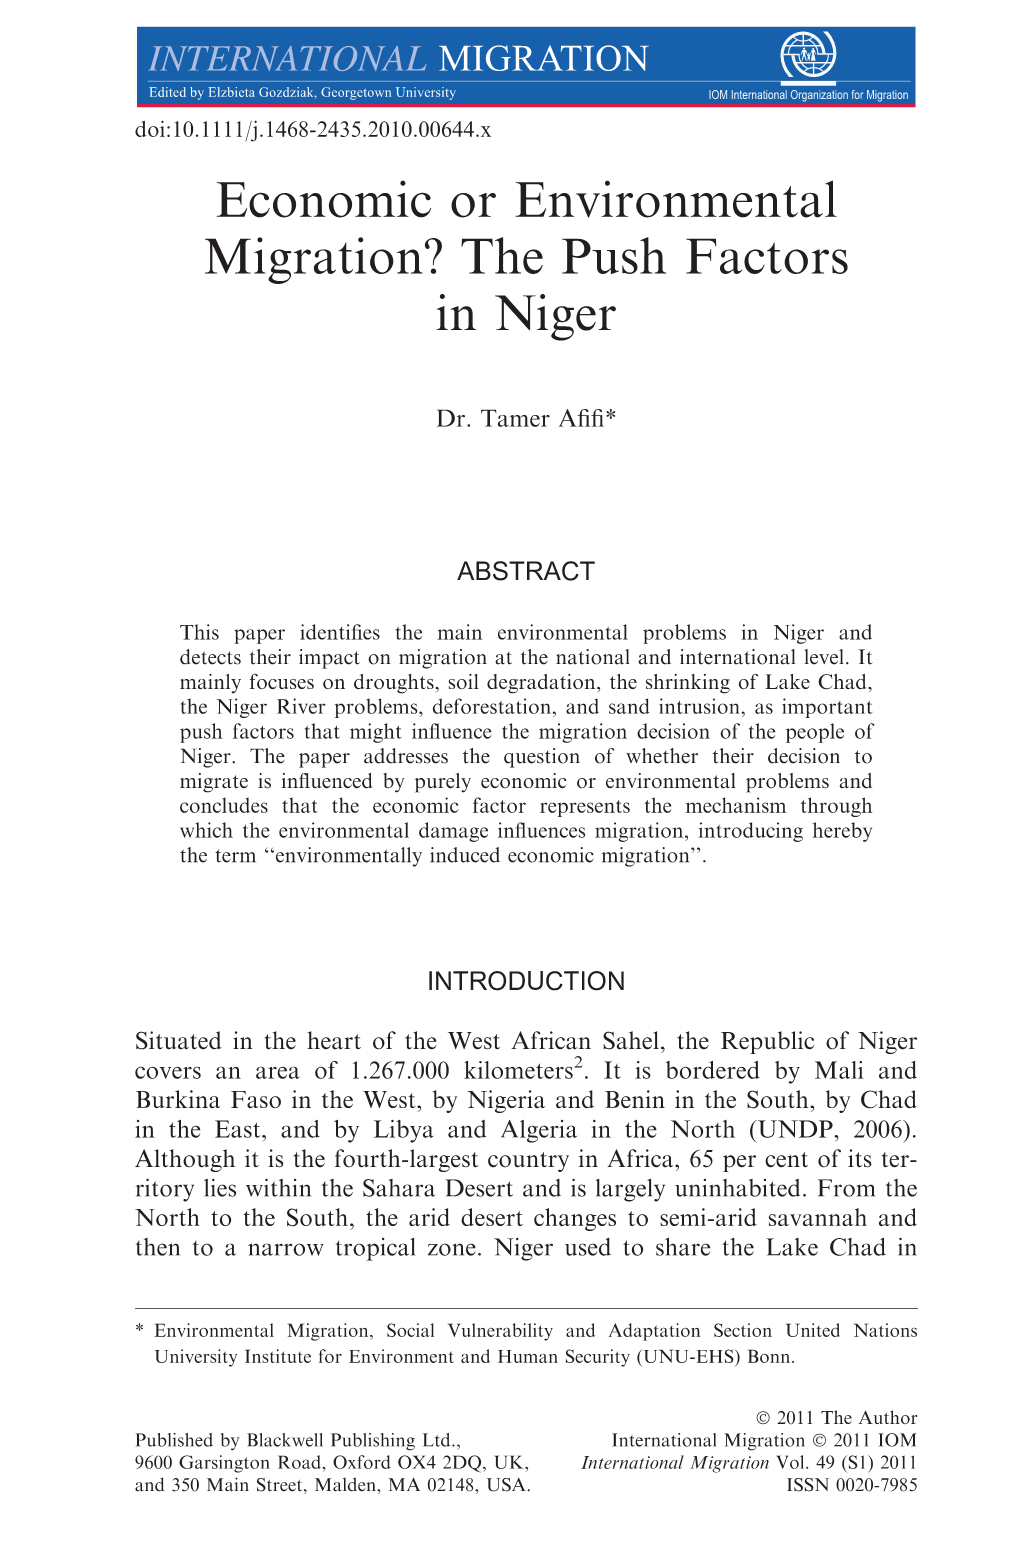 Economic Or Environmental Migration? the Push Factors in Niger